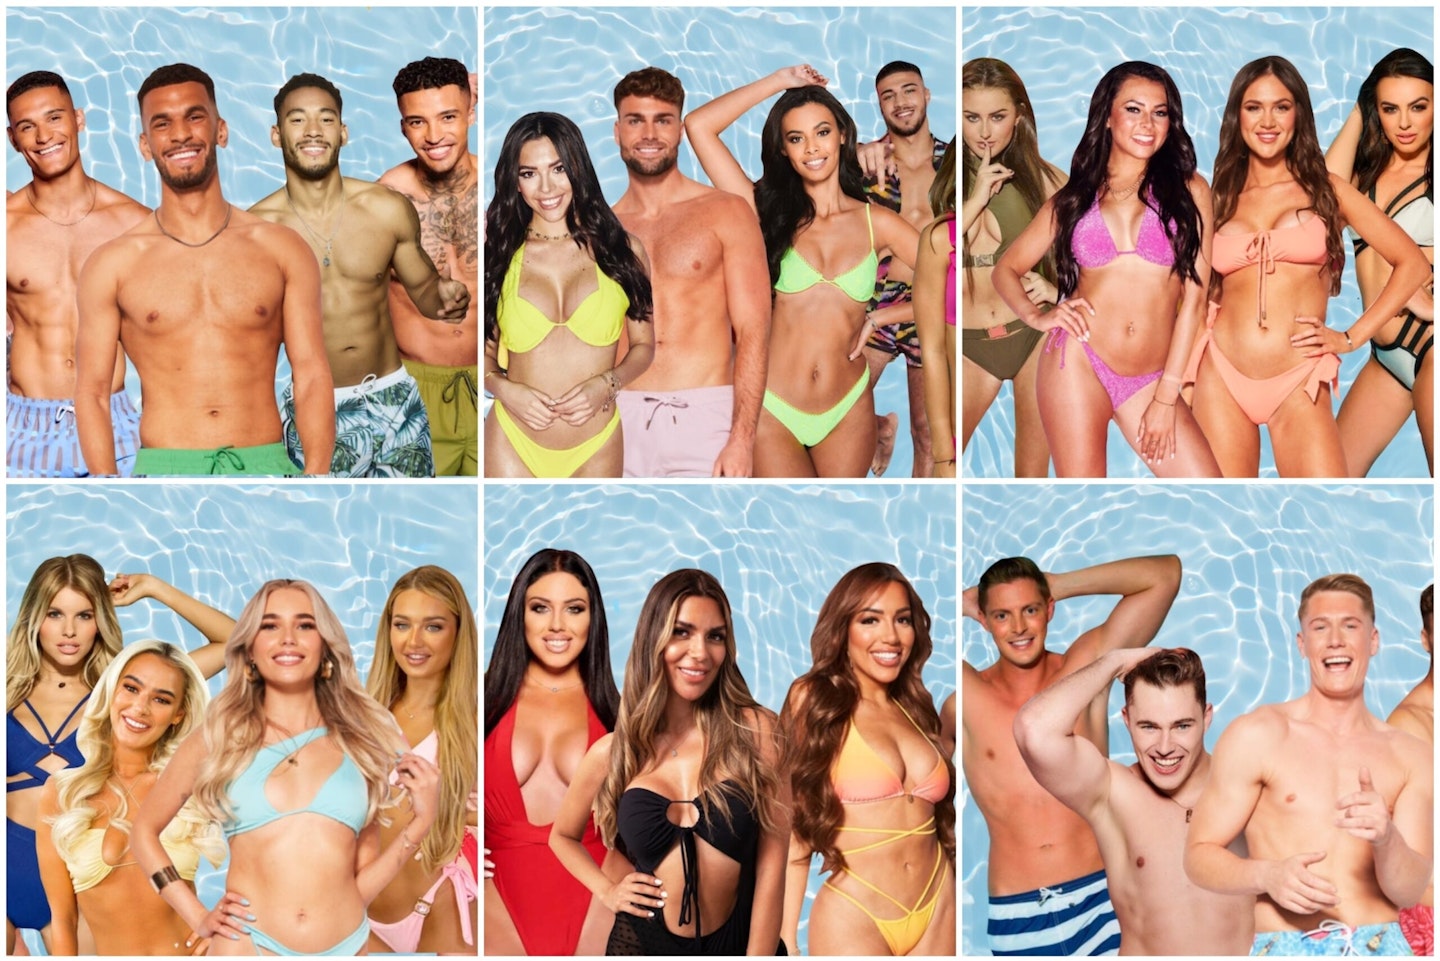 Love Island USA and Secrets of Playboy top this week's TV must-sees